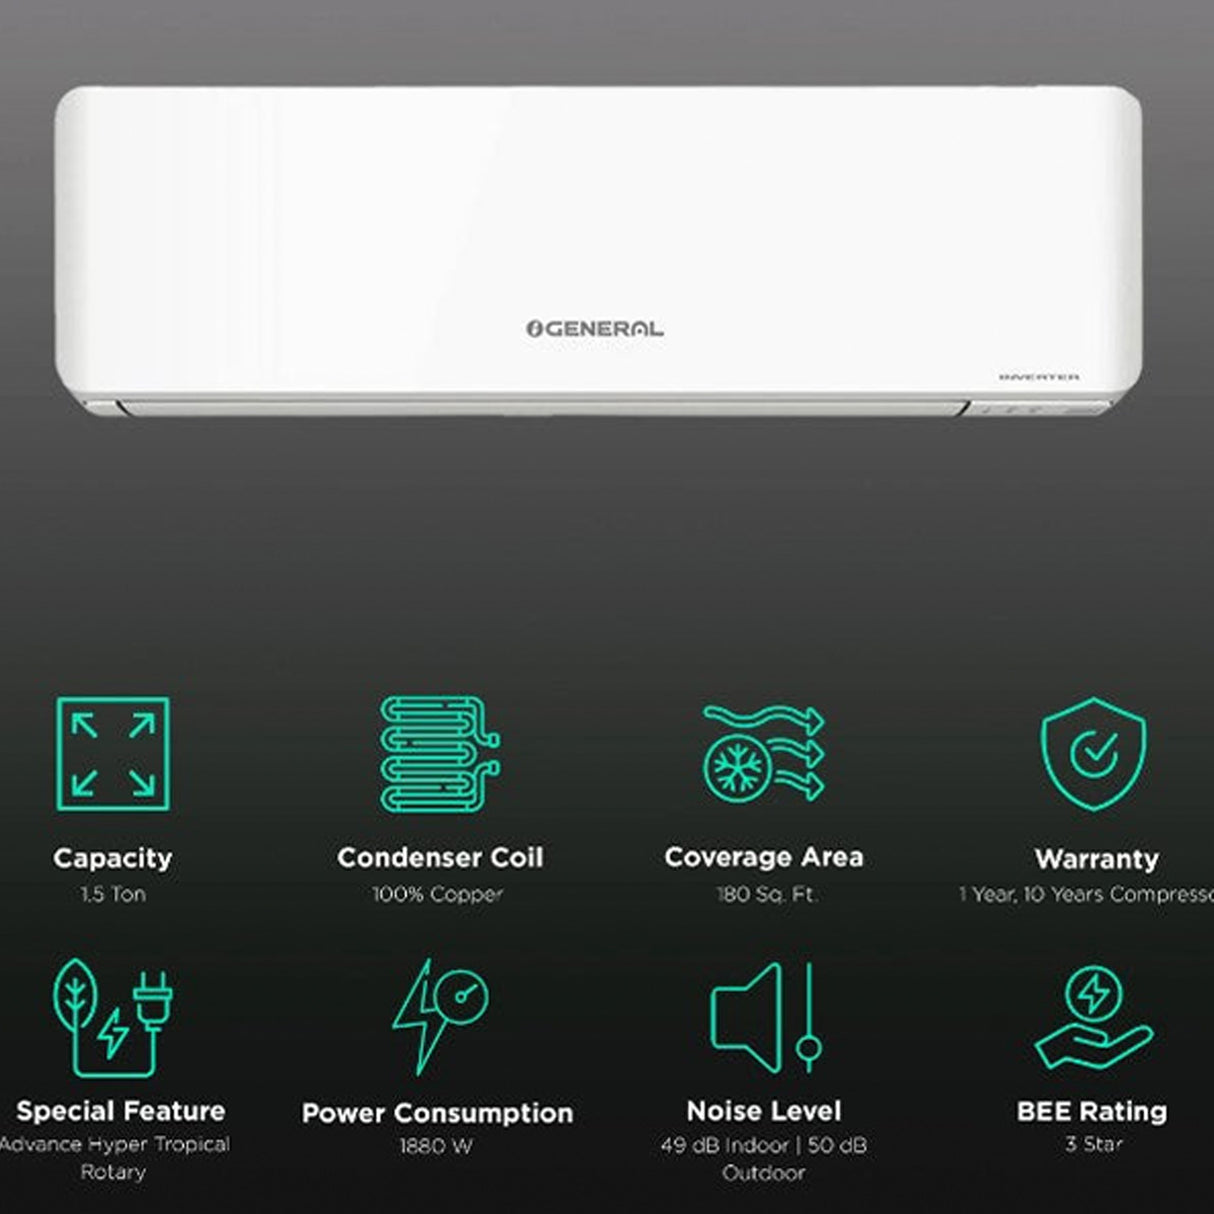 Experience cooling excellence with O GENERAL's top-tier 1.5 Ton 3 Star Inverter Split AC in 2023.